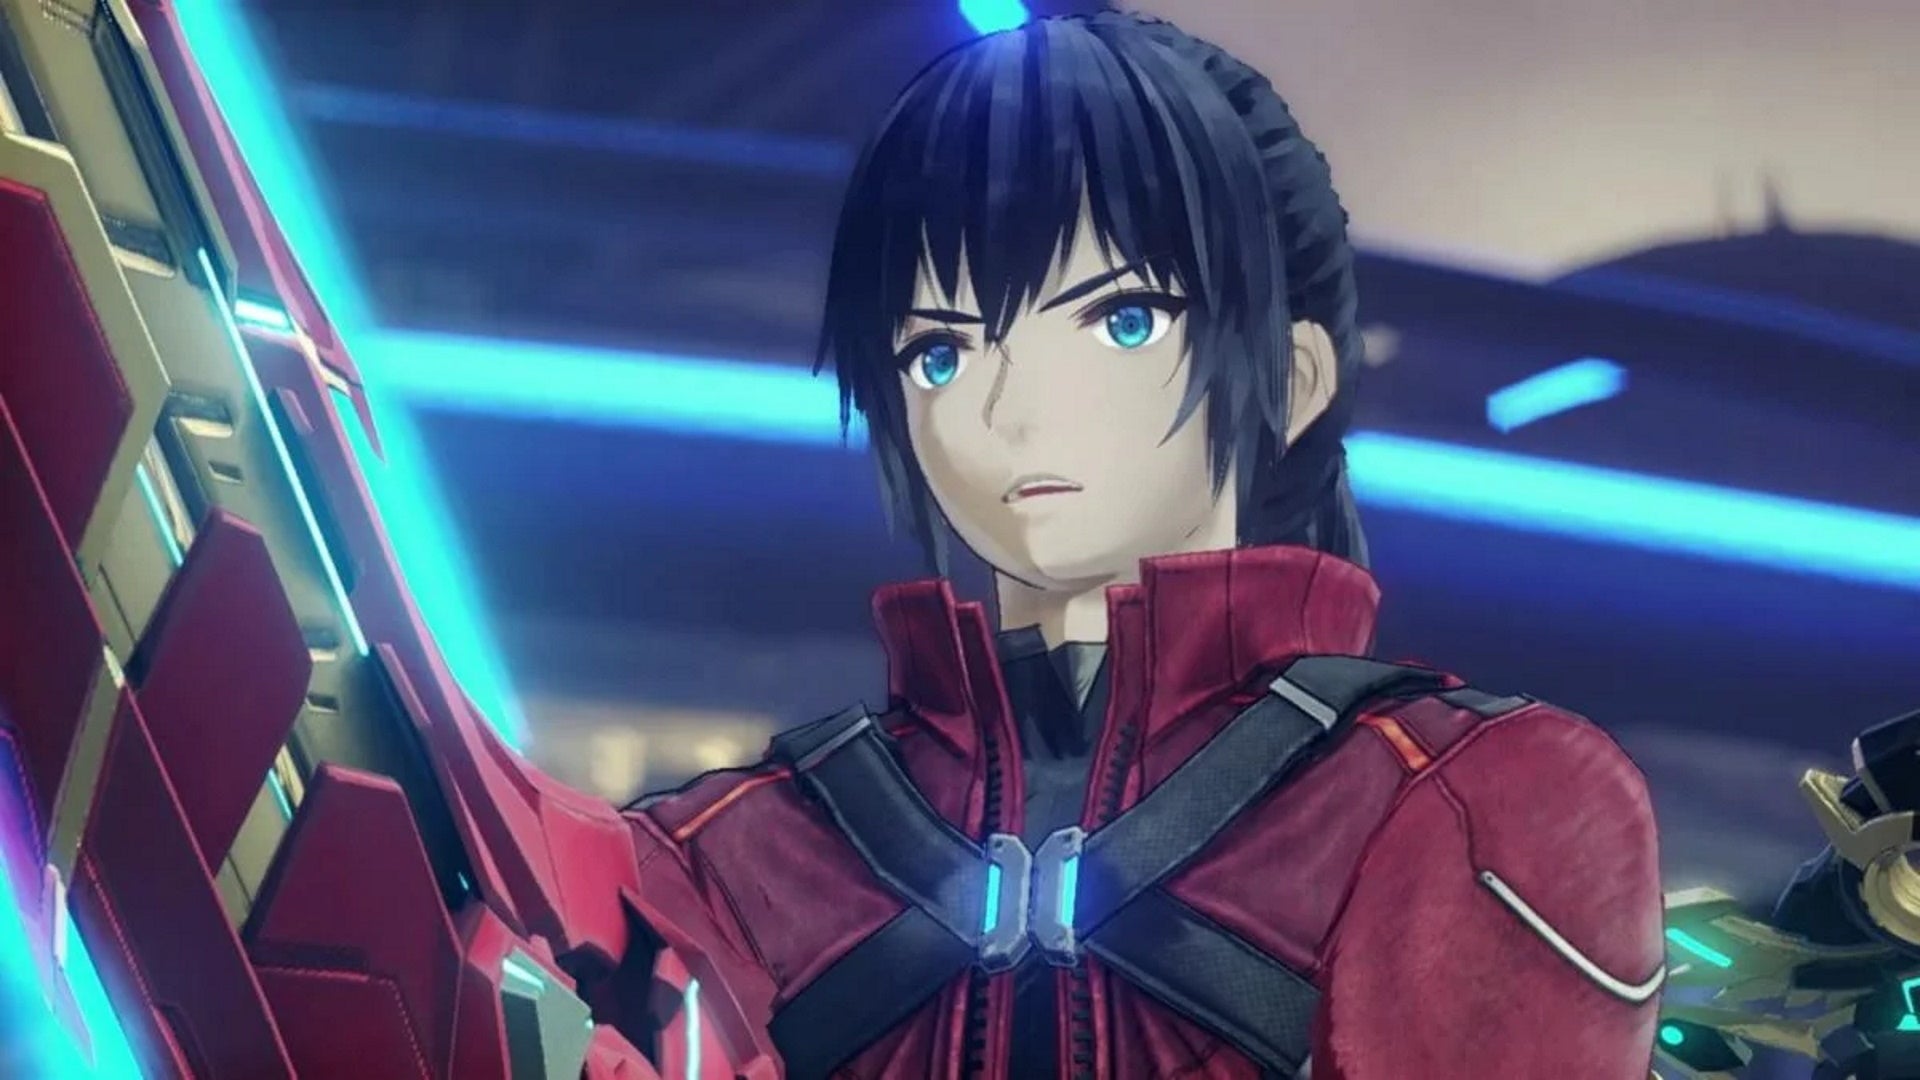 Xenoblade Chronicles 3 ascension quests: Noah faces a group of enemies as a Swordfighter